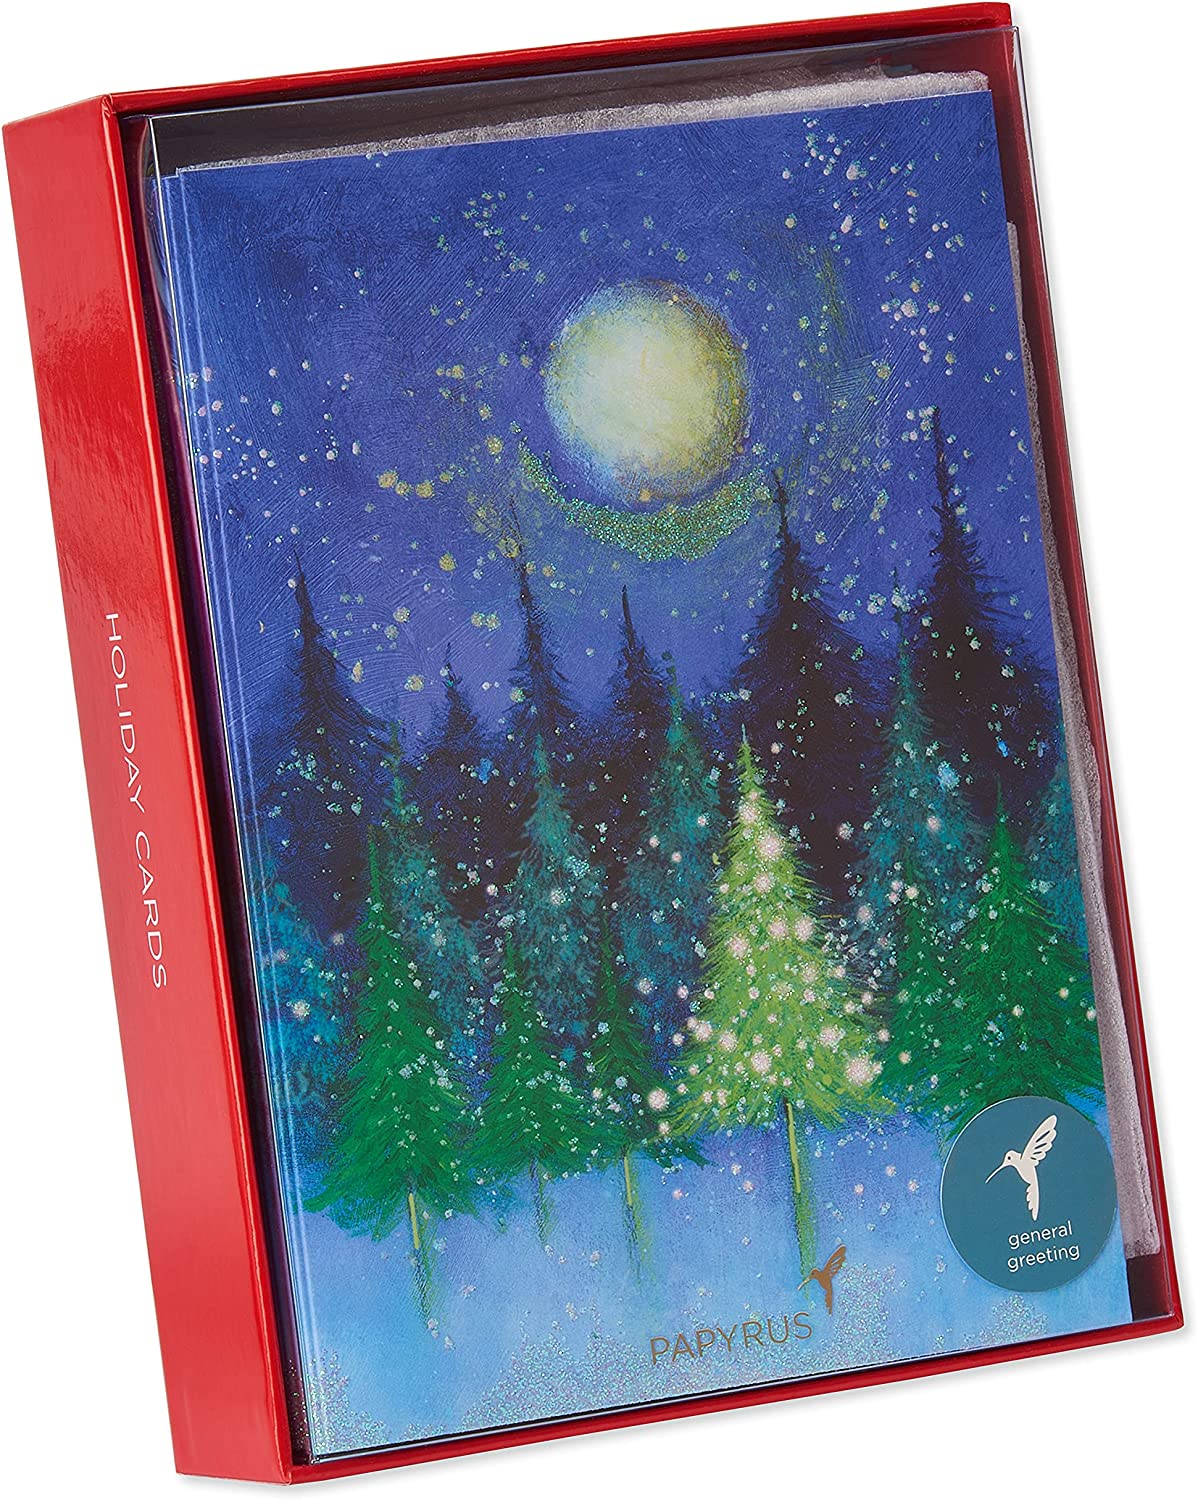 Papyrus Holiday Cards Boxed with Envelopes, Wonder, Joy, and Peace of the Season, Holiday Tree (14-Count)